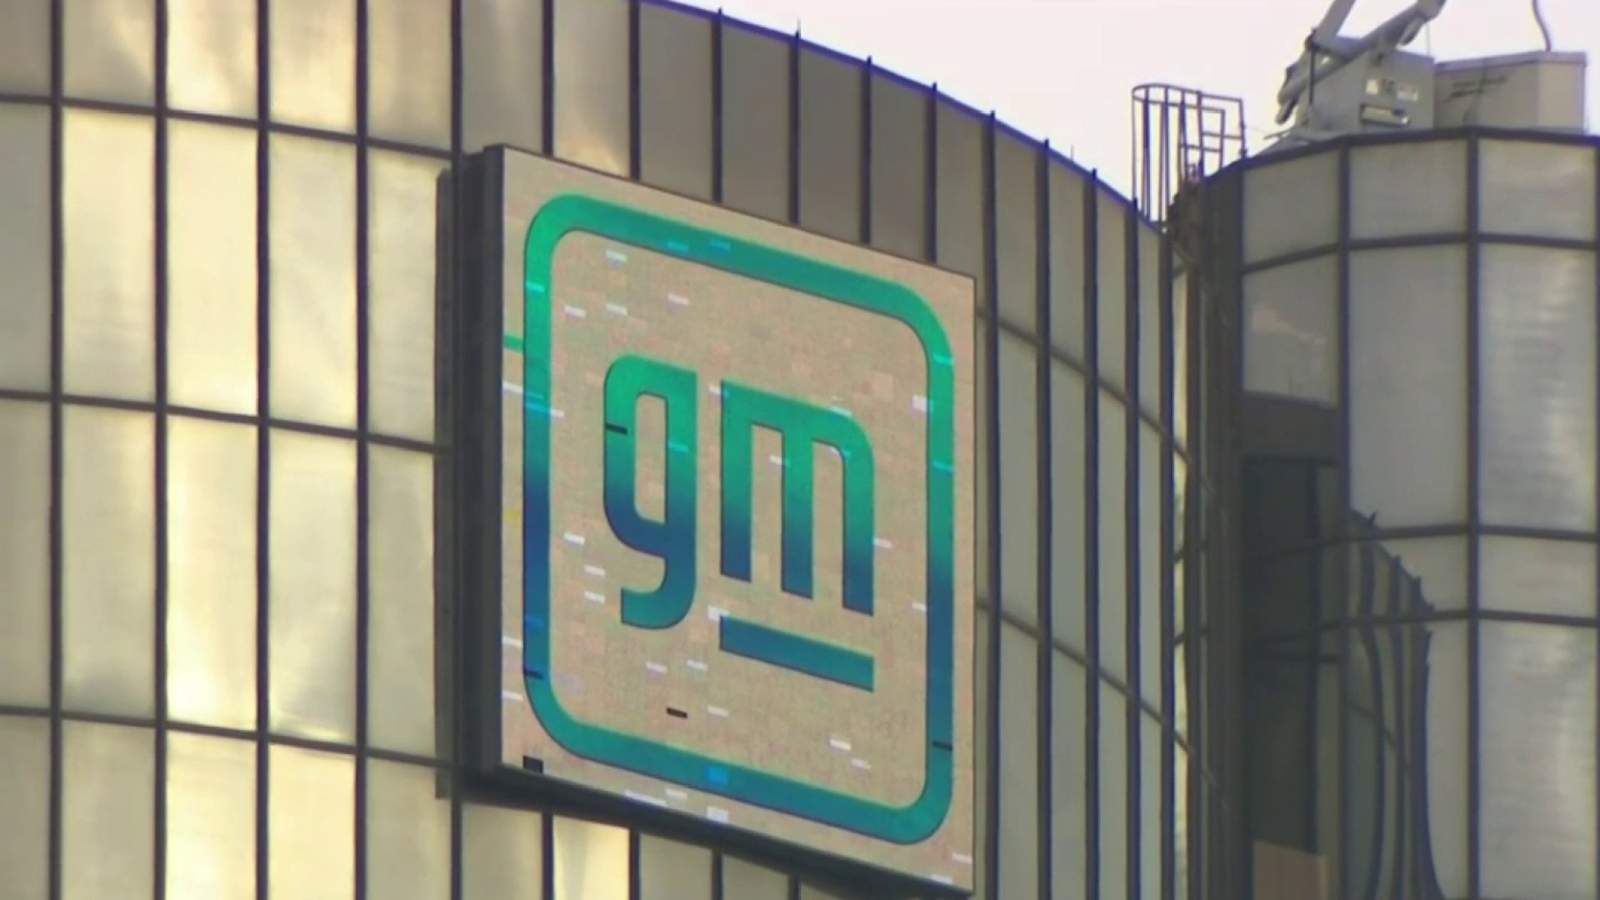 General Motors aims to be carbon neutral by 2040